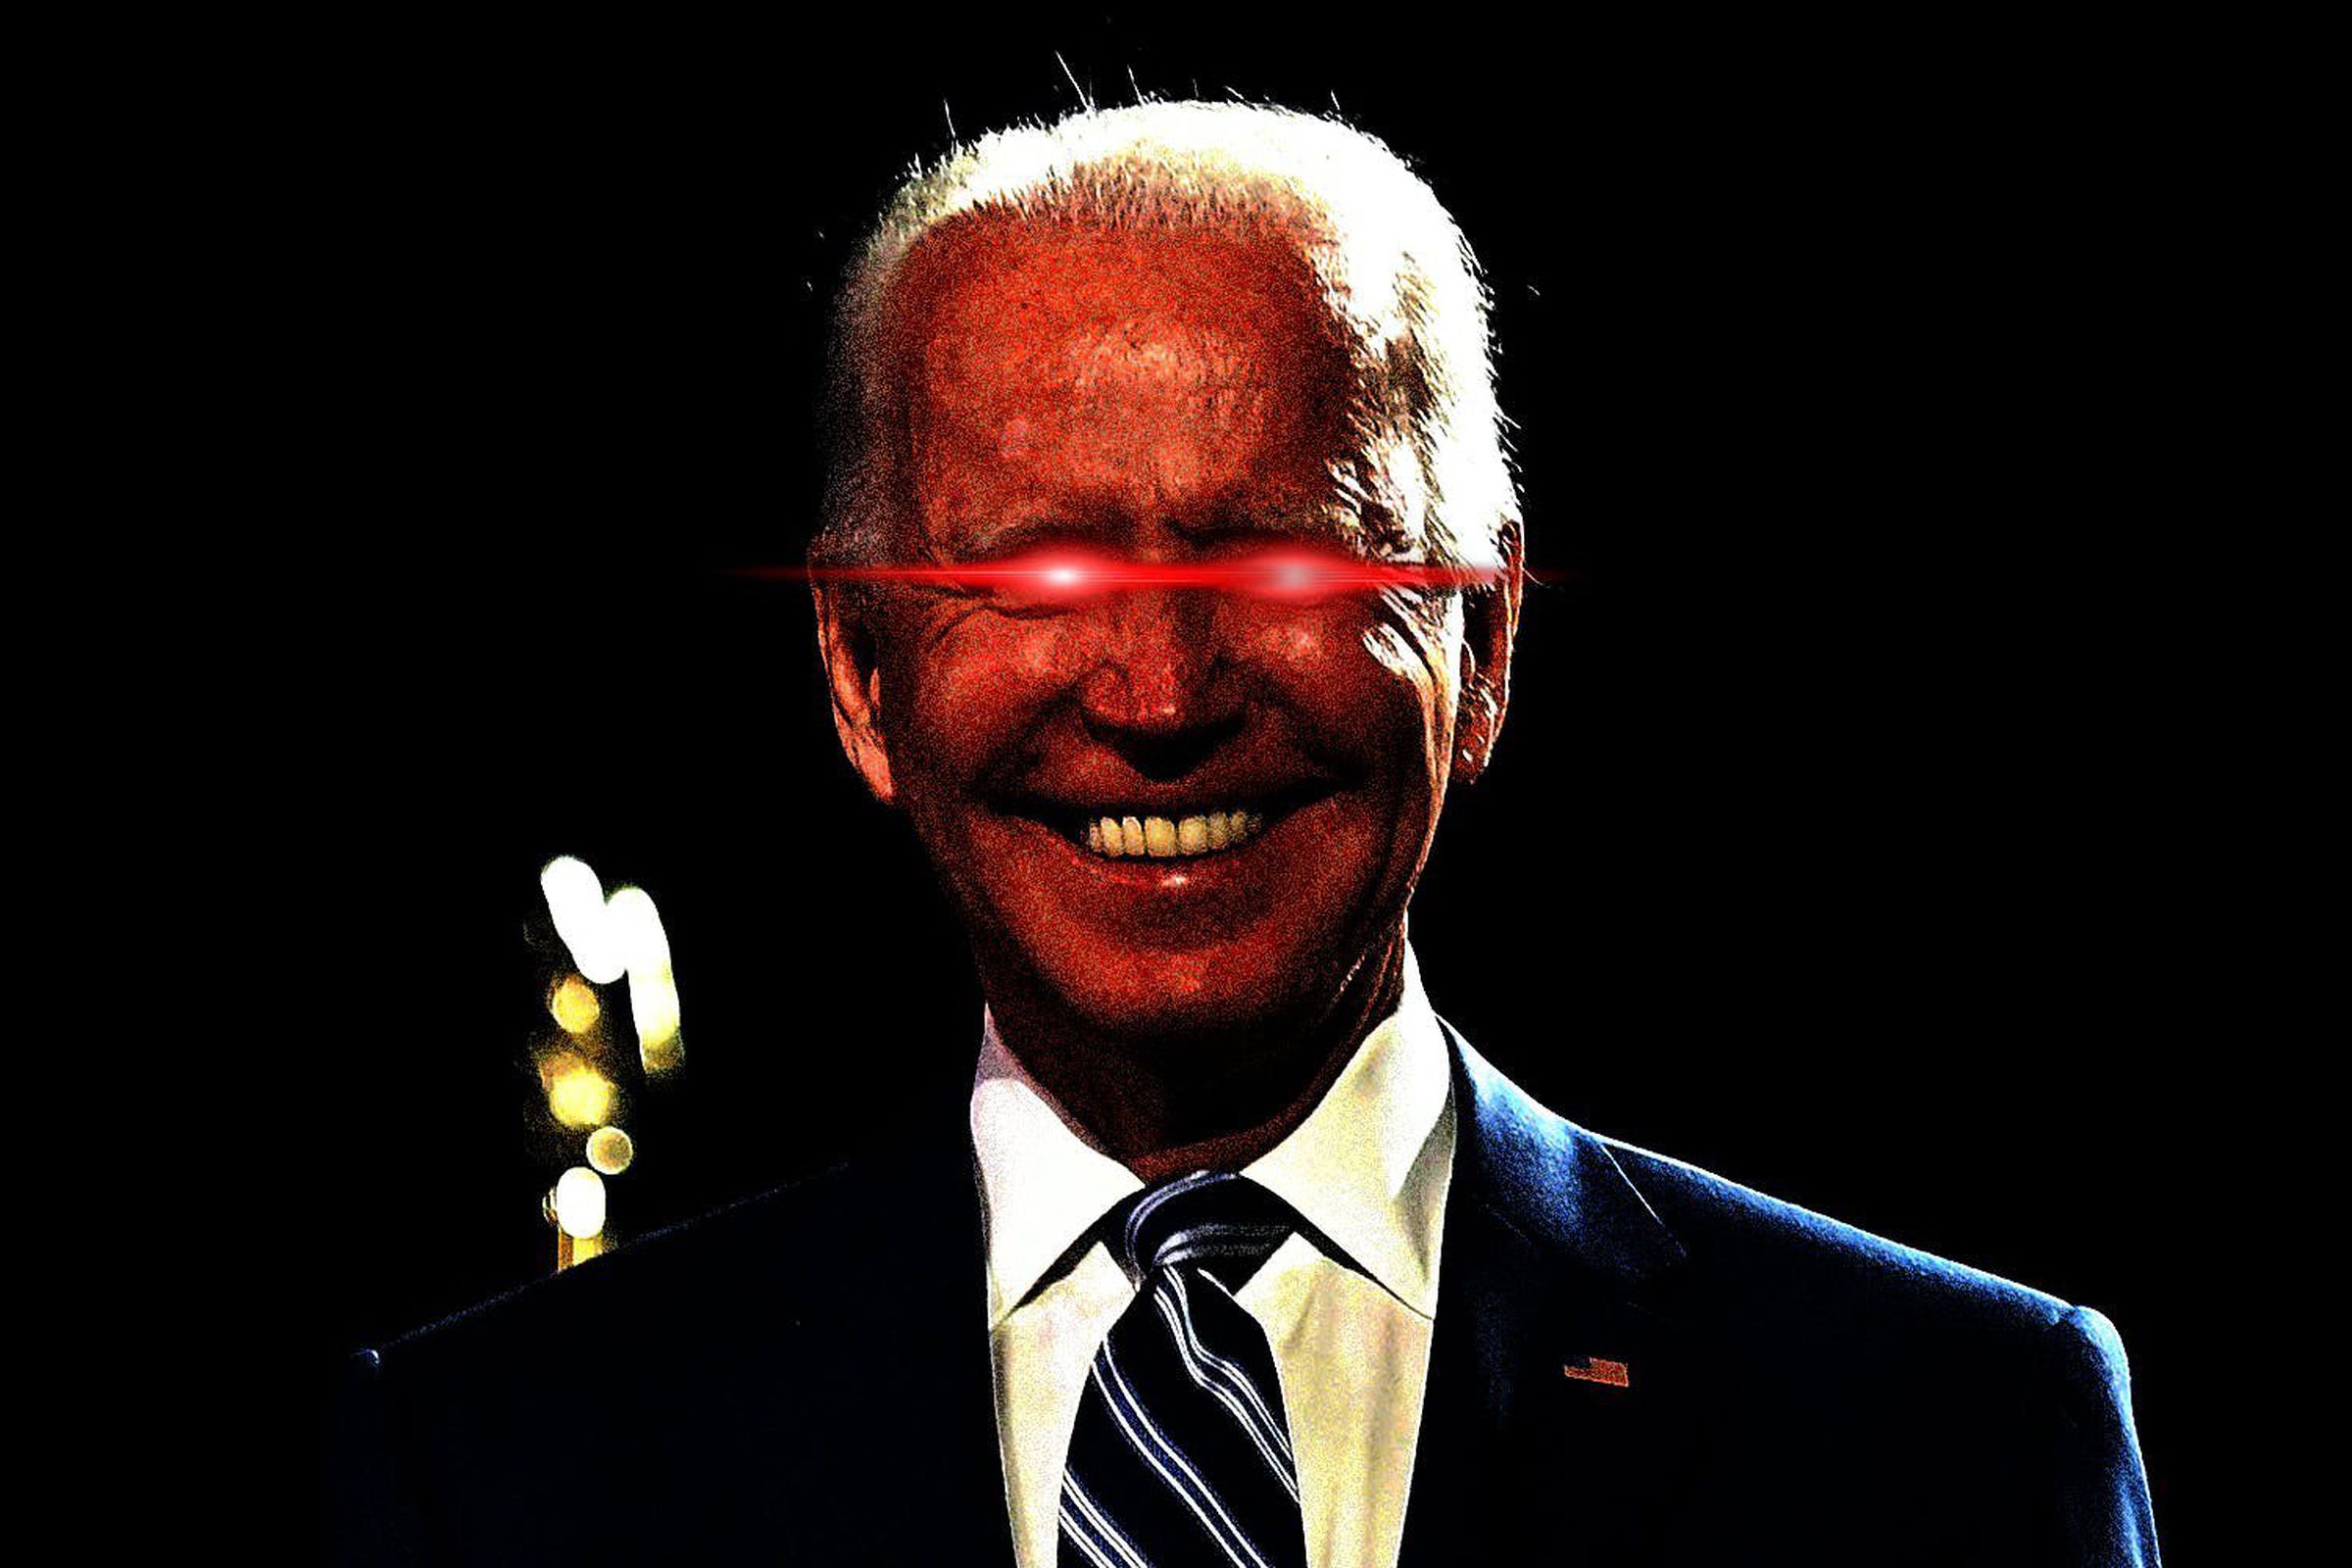 An image of President Joe Biden edited to replace his eyes with red laser beams.